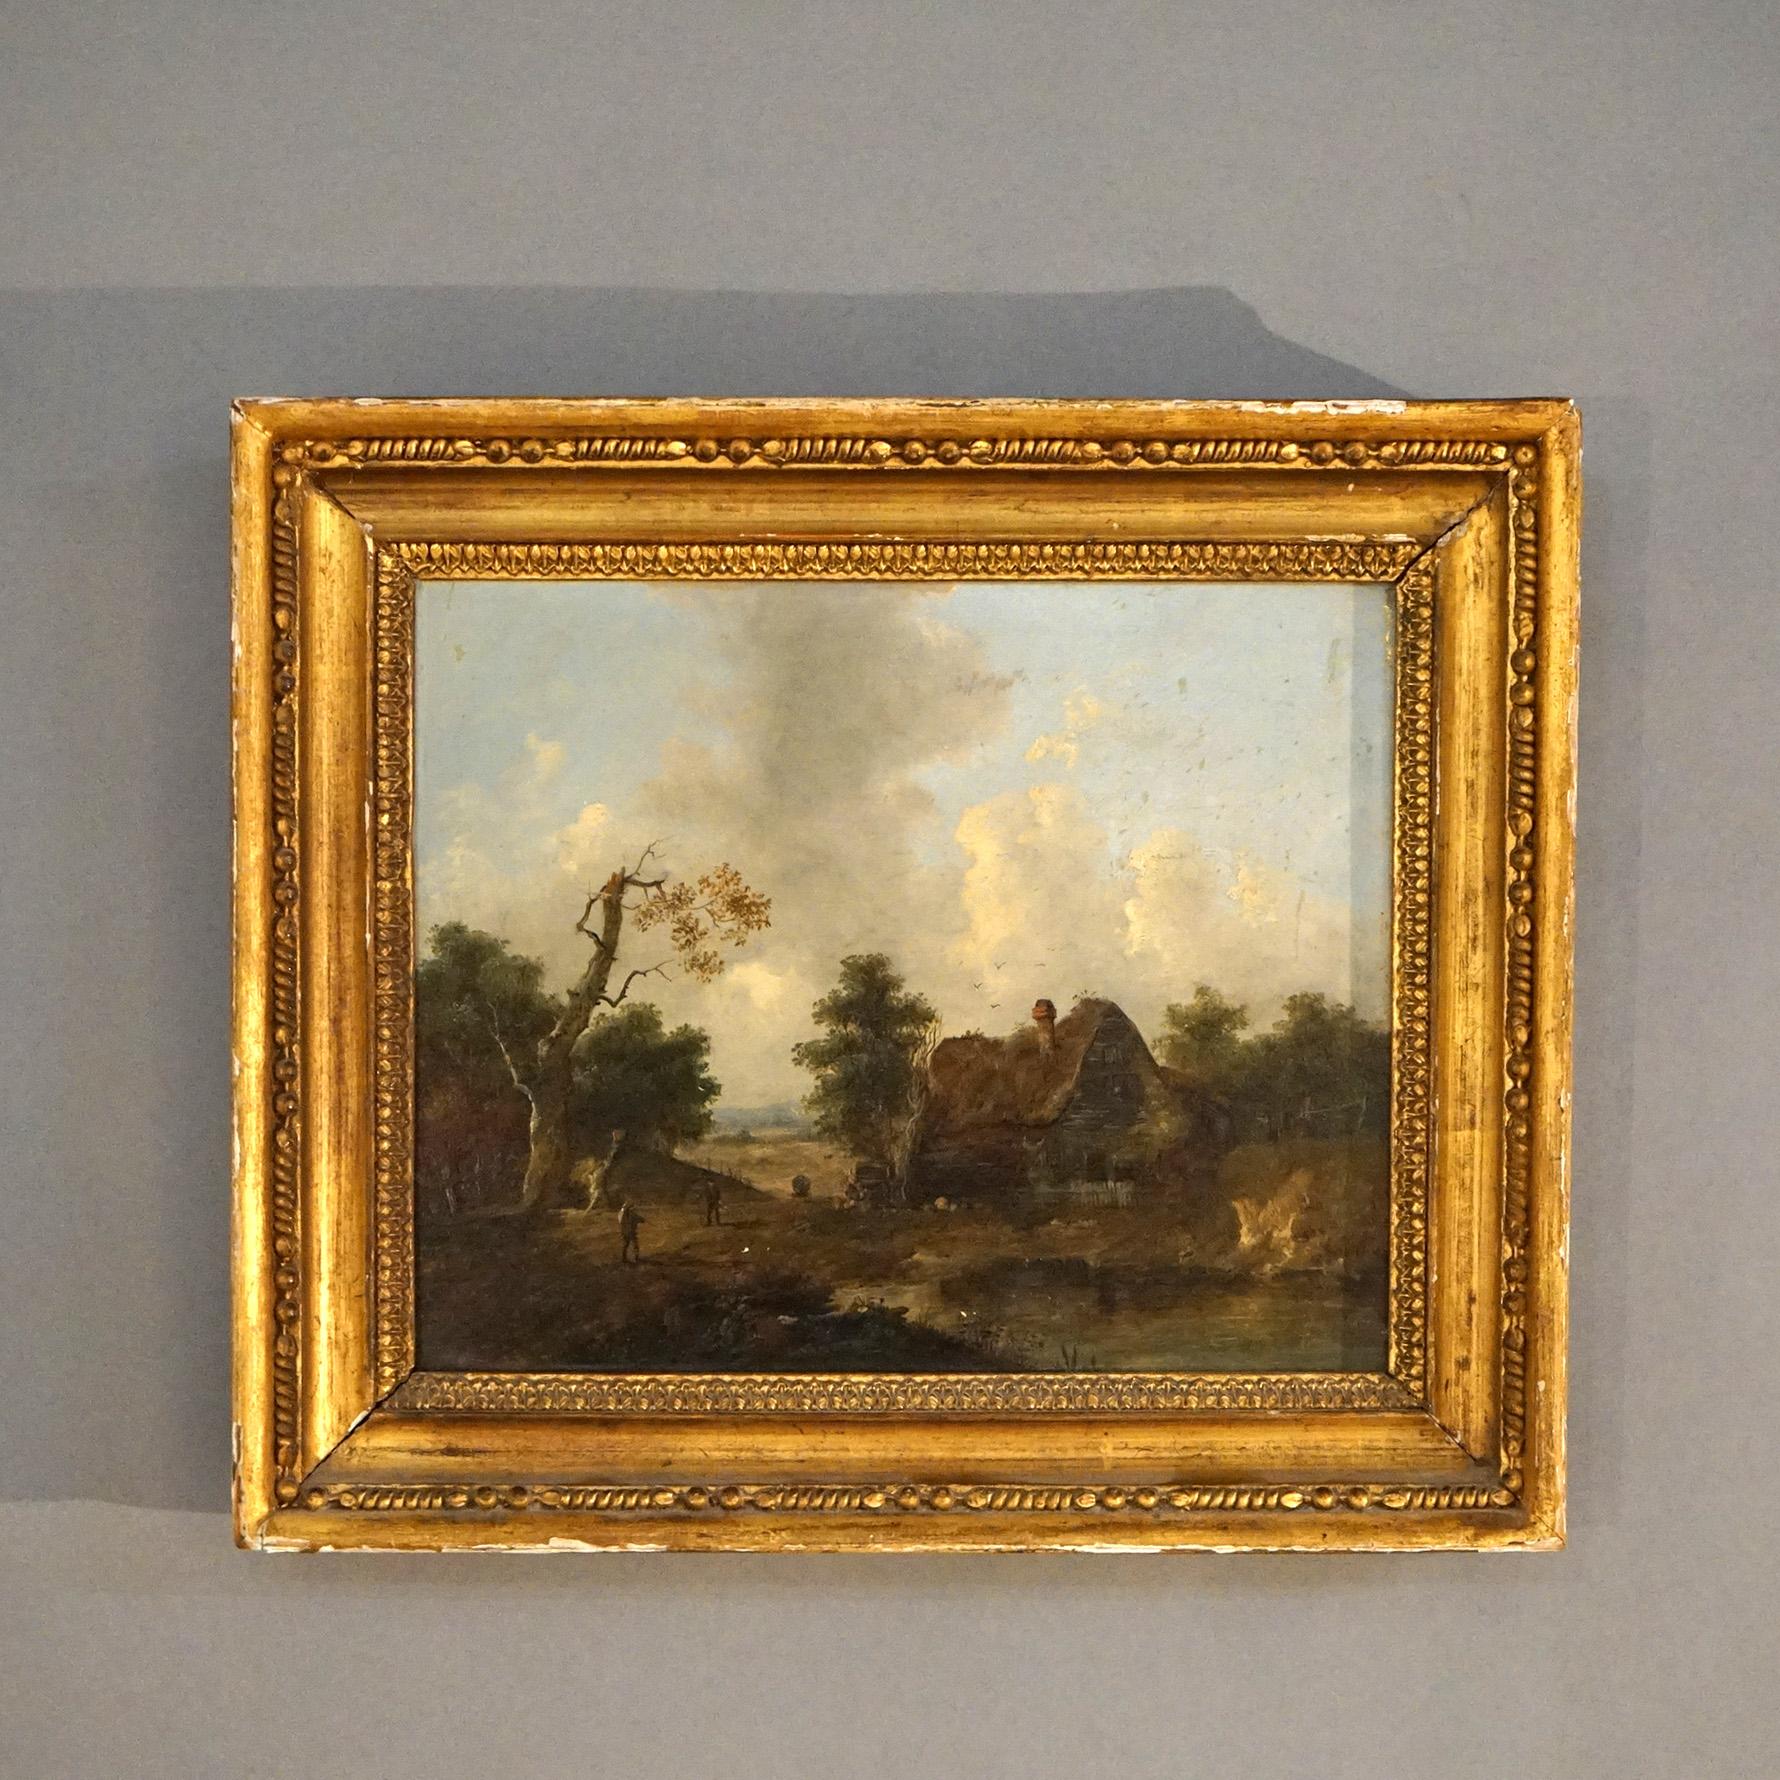 Antique Oil on Panel Painting, European Landscape with Farm Scene with Figures, Seated in Giltwood Frame, Circa 1890

Measures - 13.5